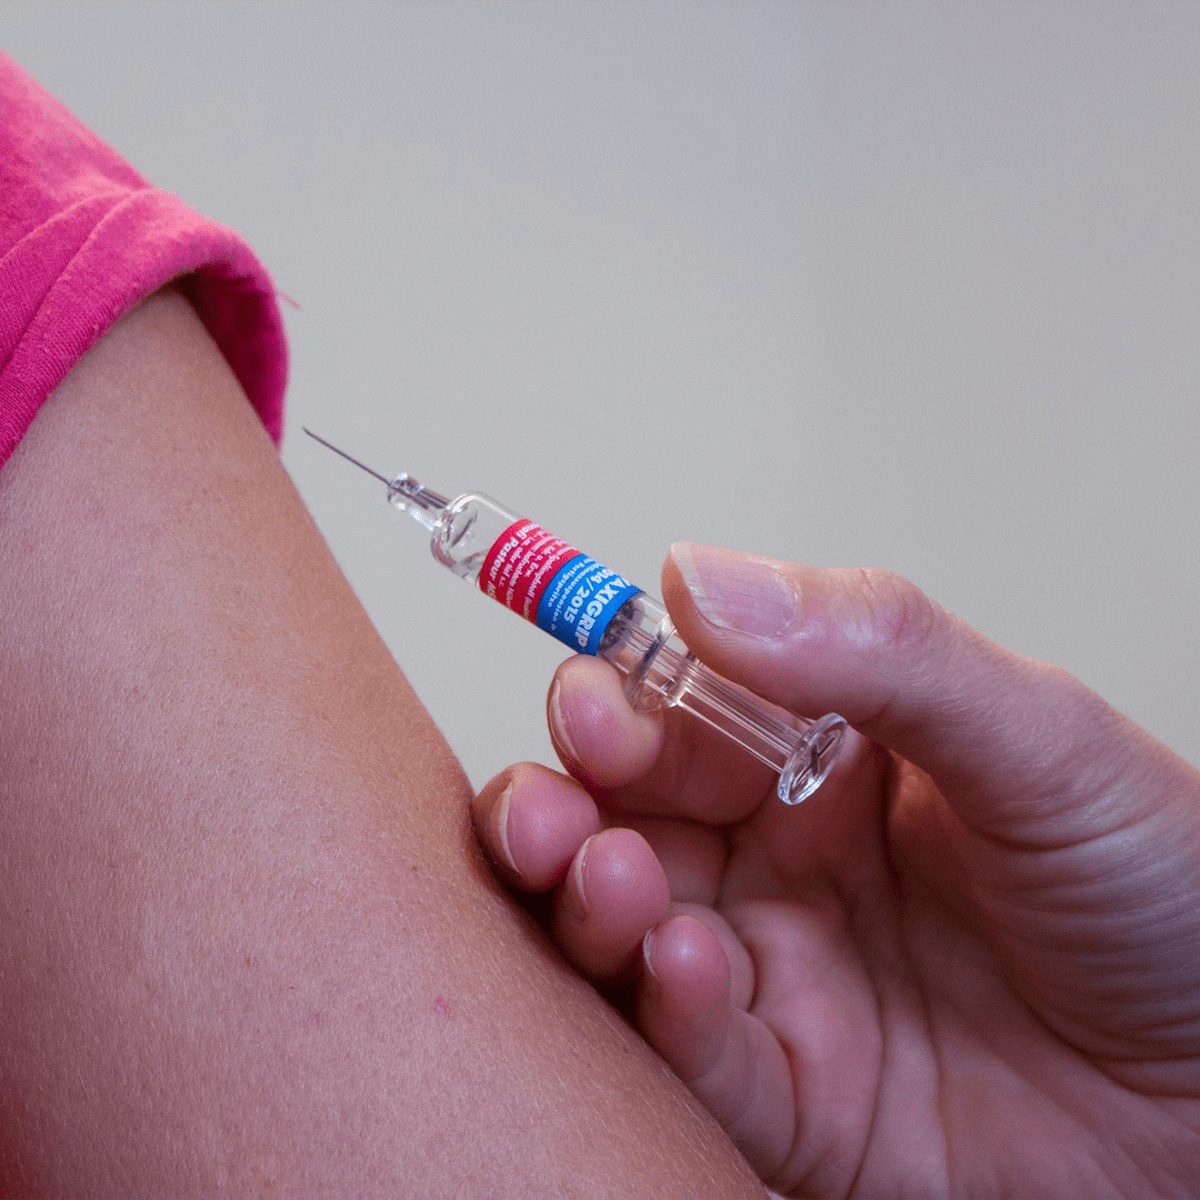 New Study Shows Most Blood Cancer Patients Benefit from an Additional  COVID-19 Vaccine Dose